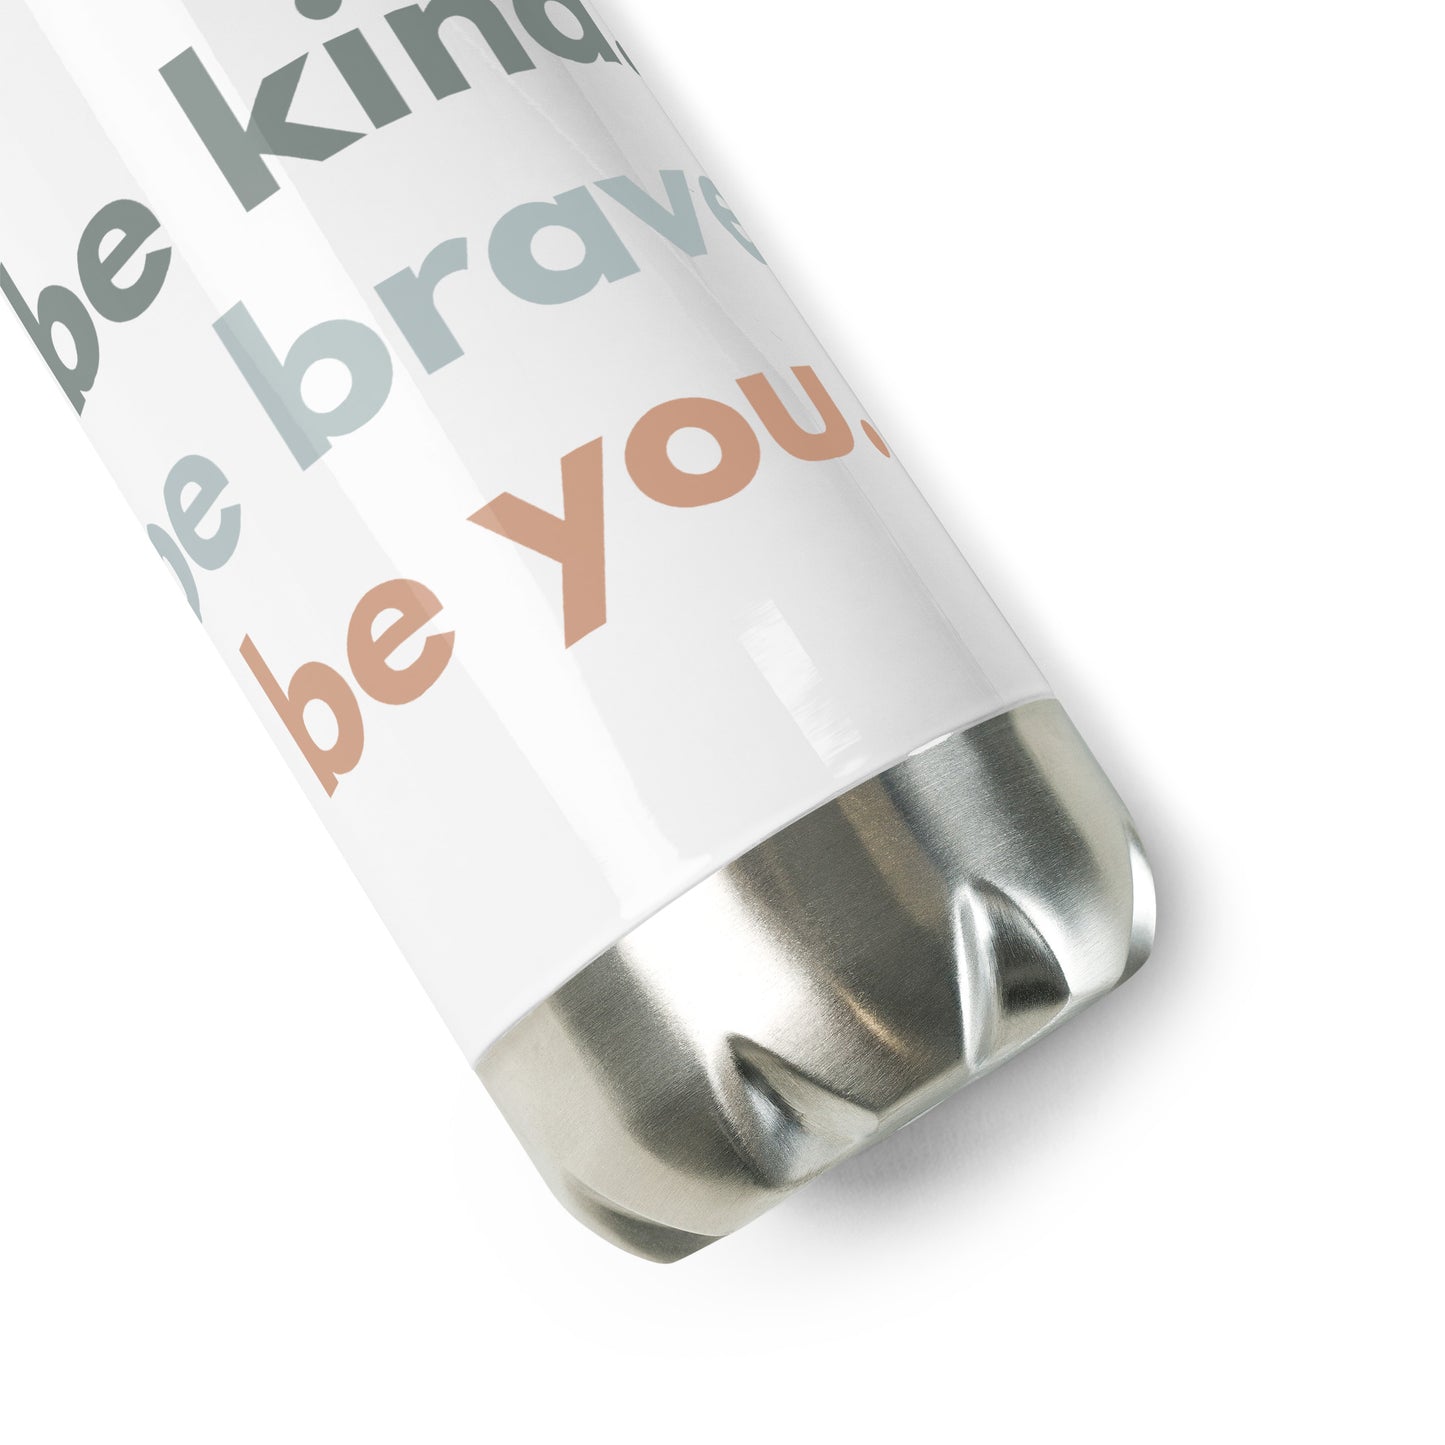 Stainless Steel Water Bottle - be kind. be brave. be you.